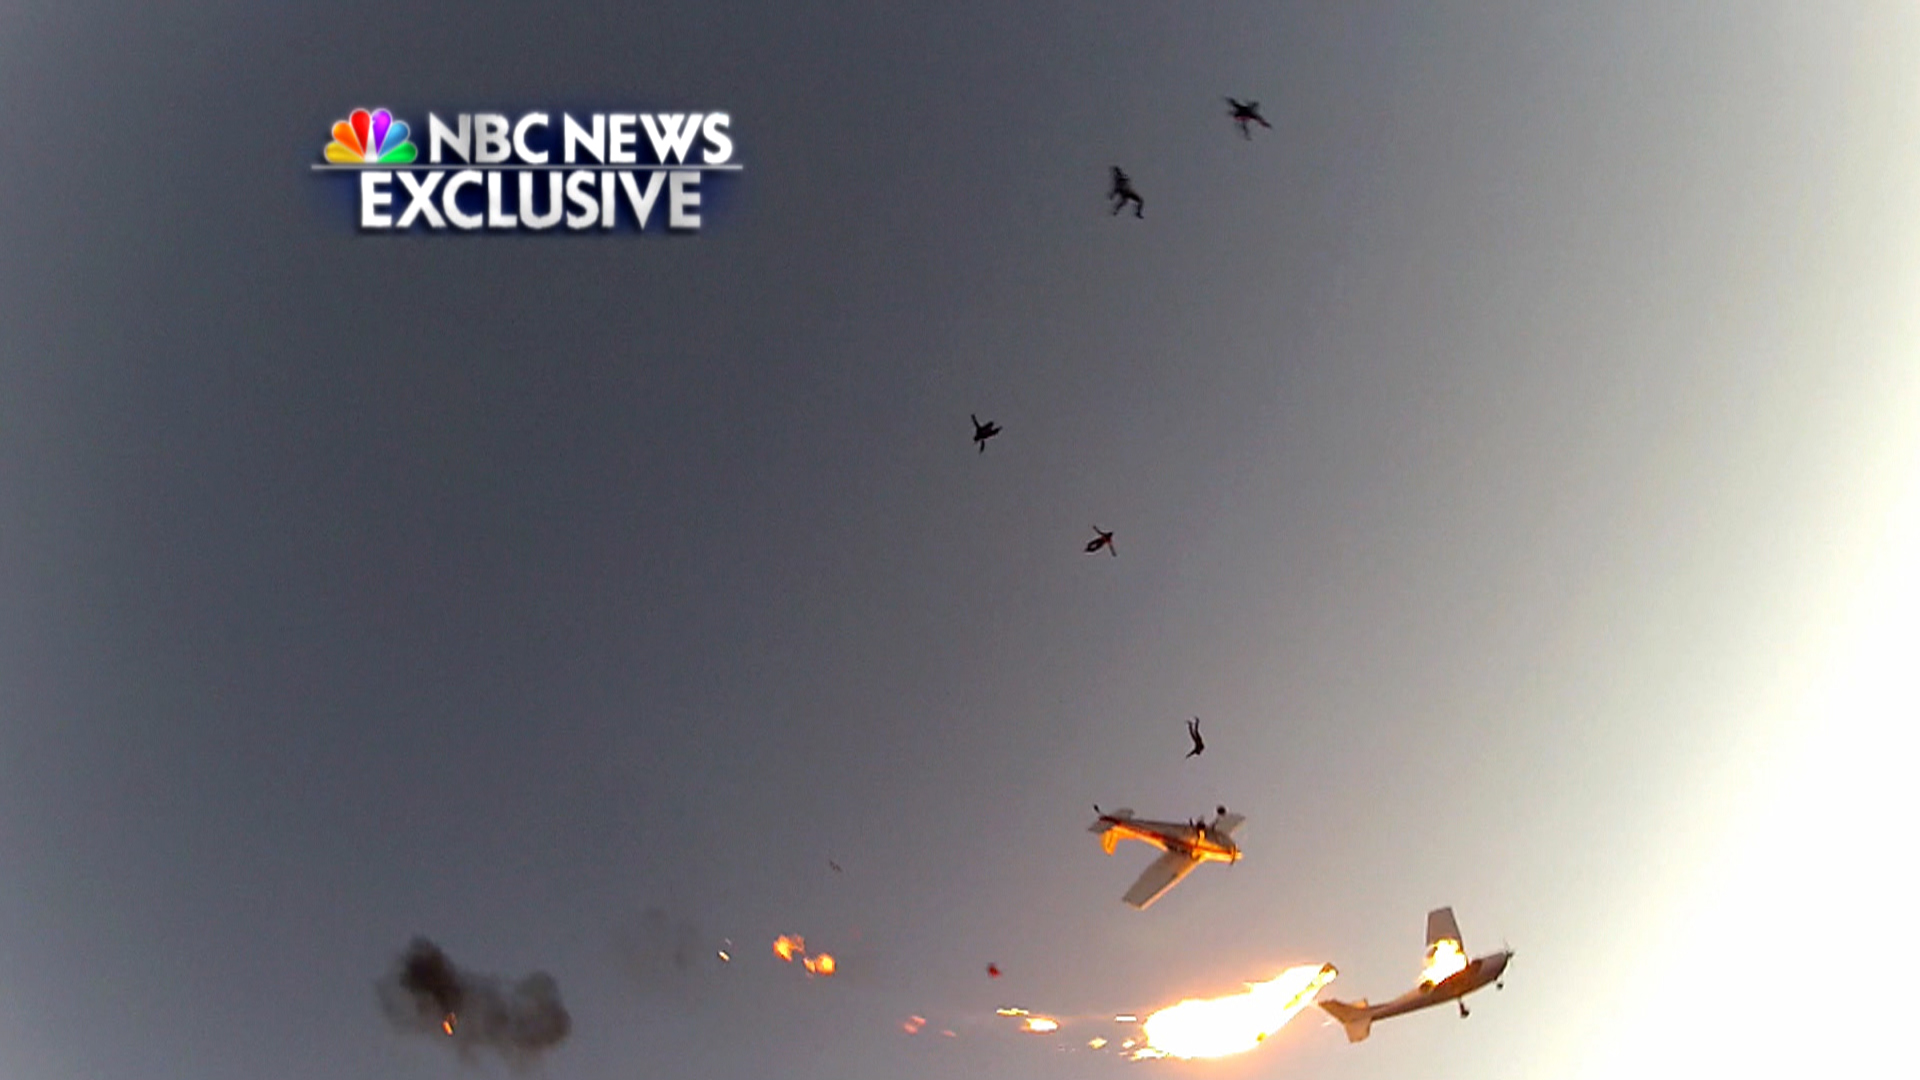 Exclusive: Skydivers' miraculous escape as planes collide - Video on ...